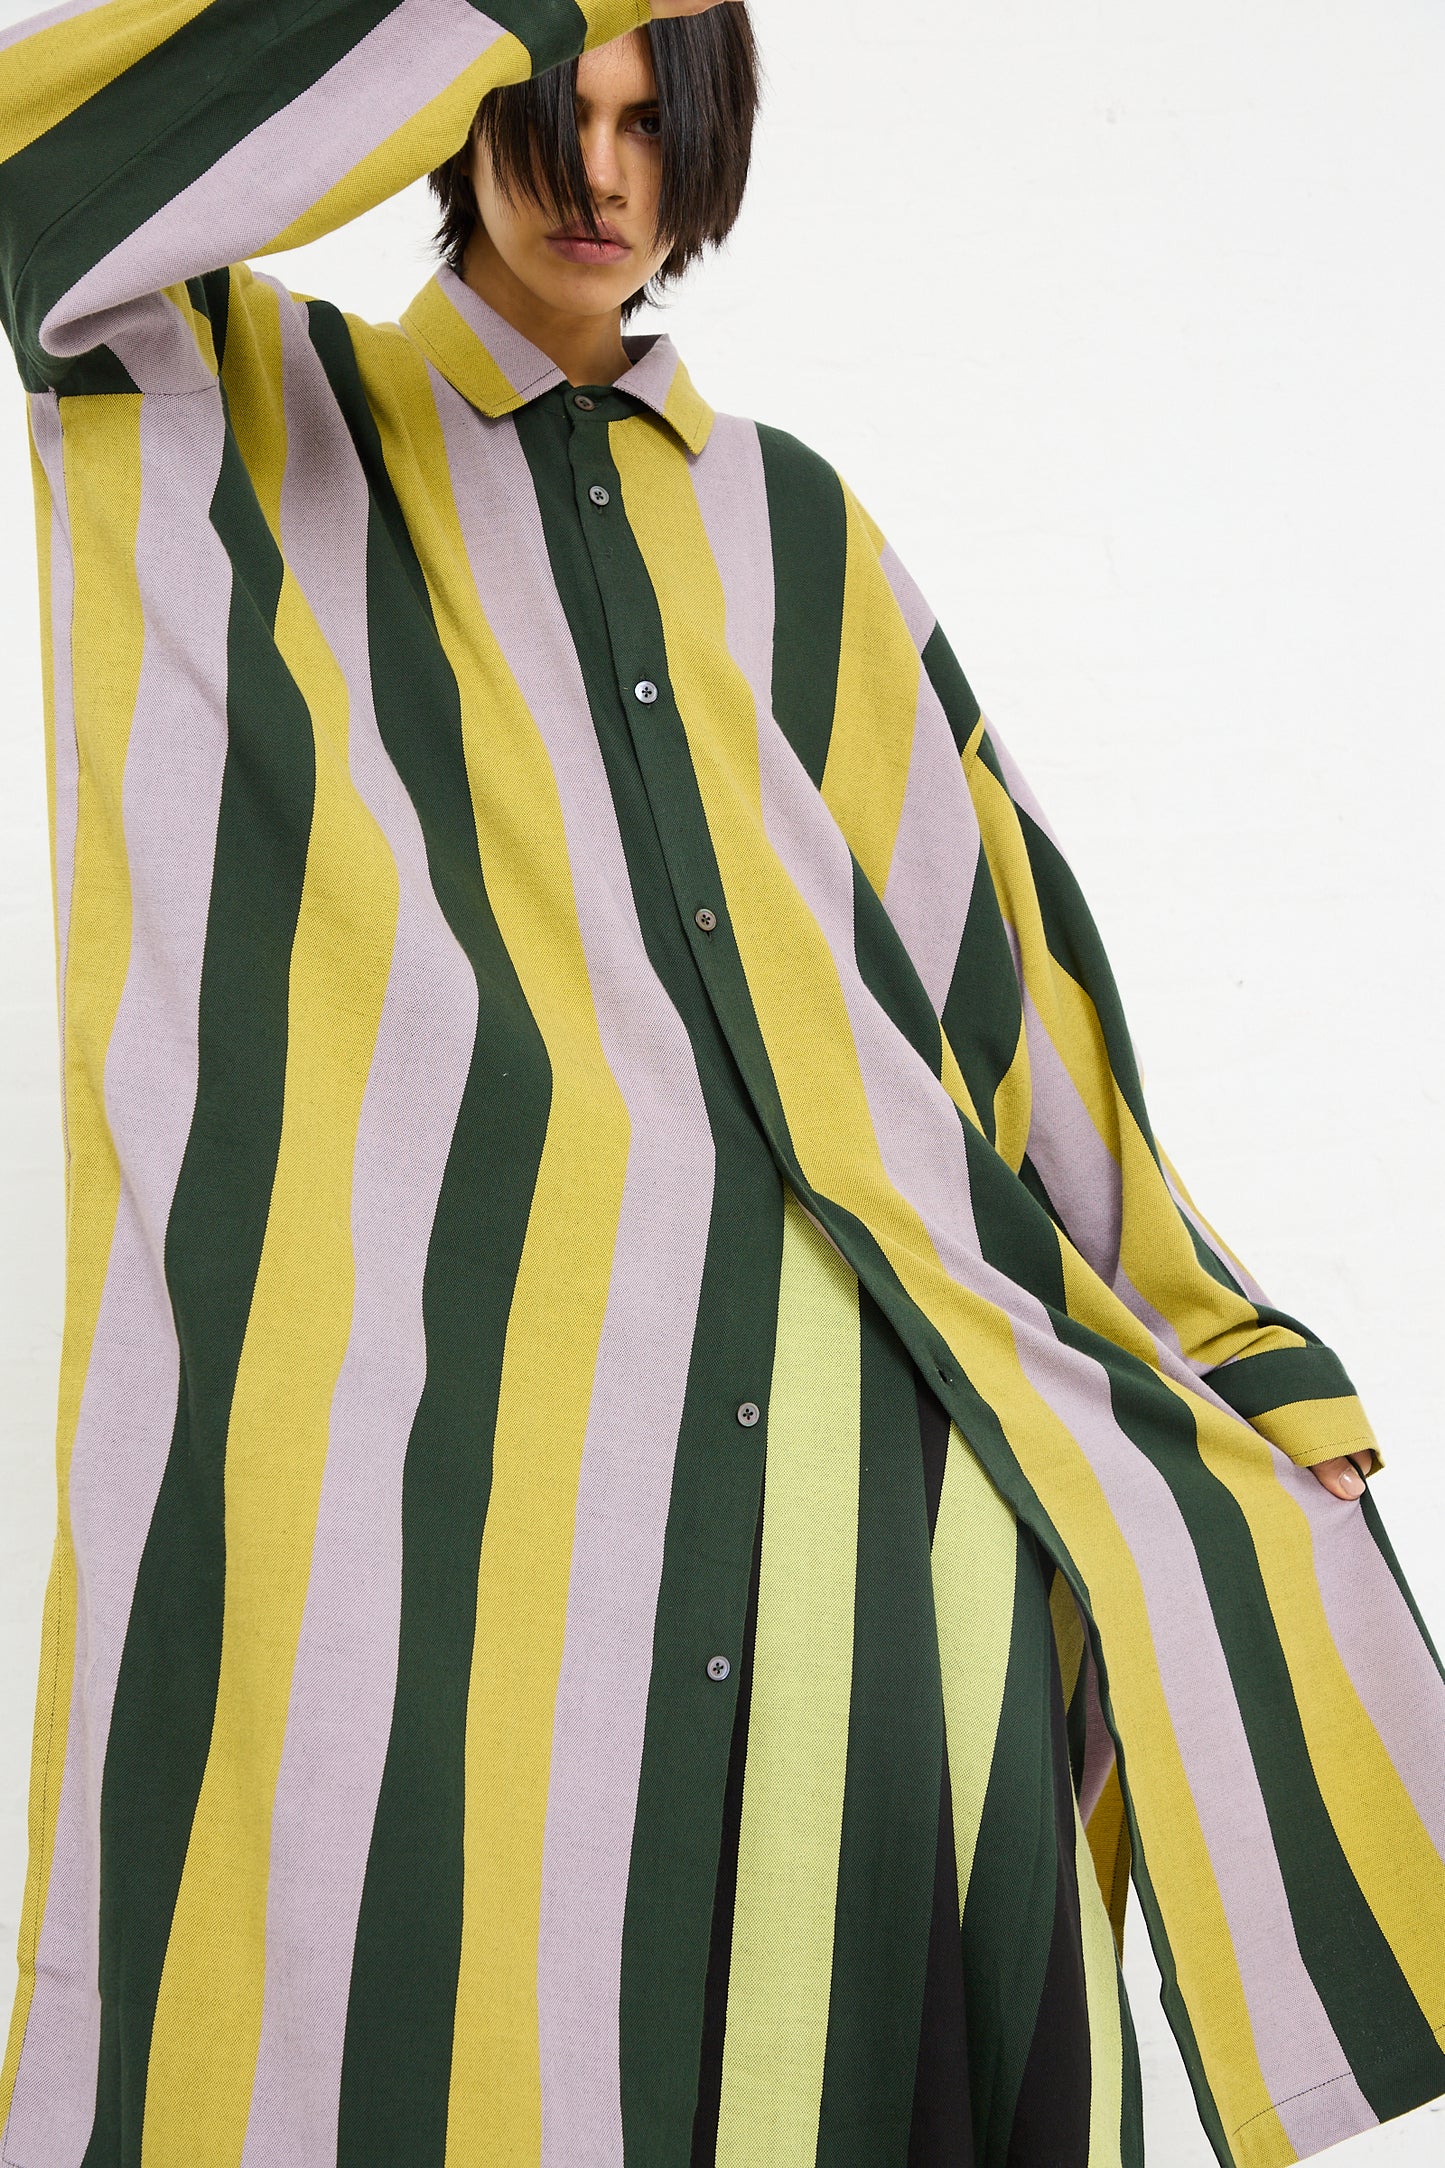 A person in a Small Collar Oversized Shirt in Stripe by Marrakshi Life with an extended sleeve draped over their head, made in Morocco.